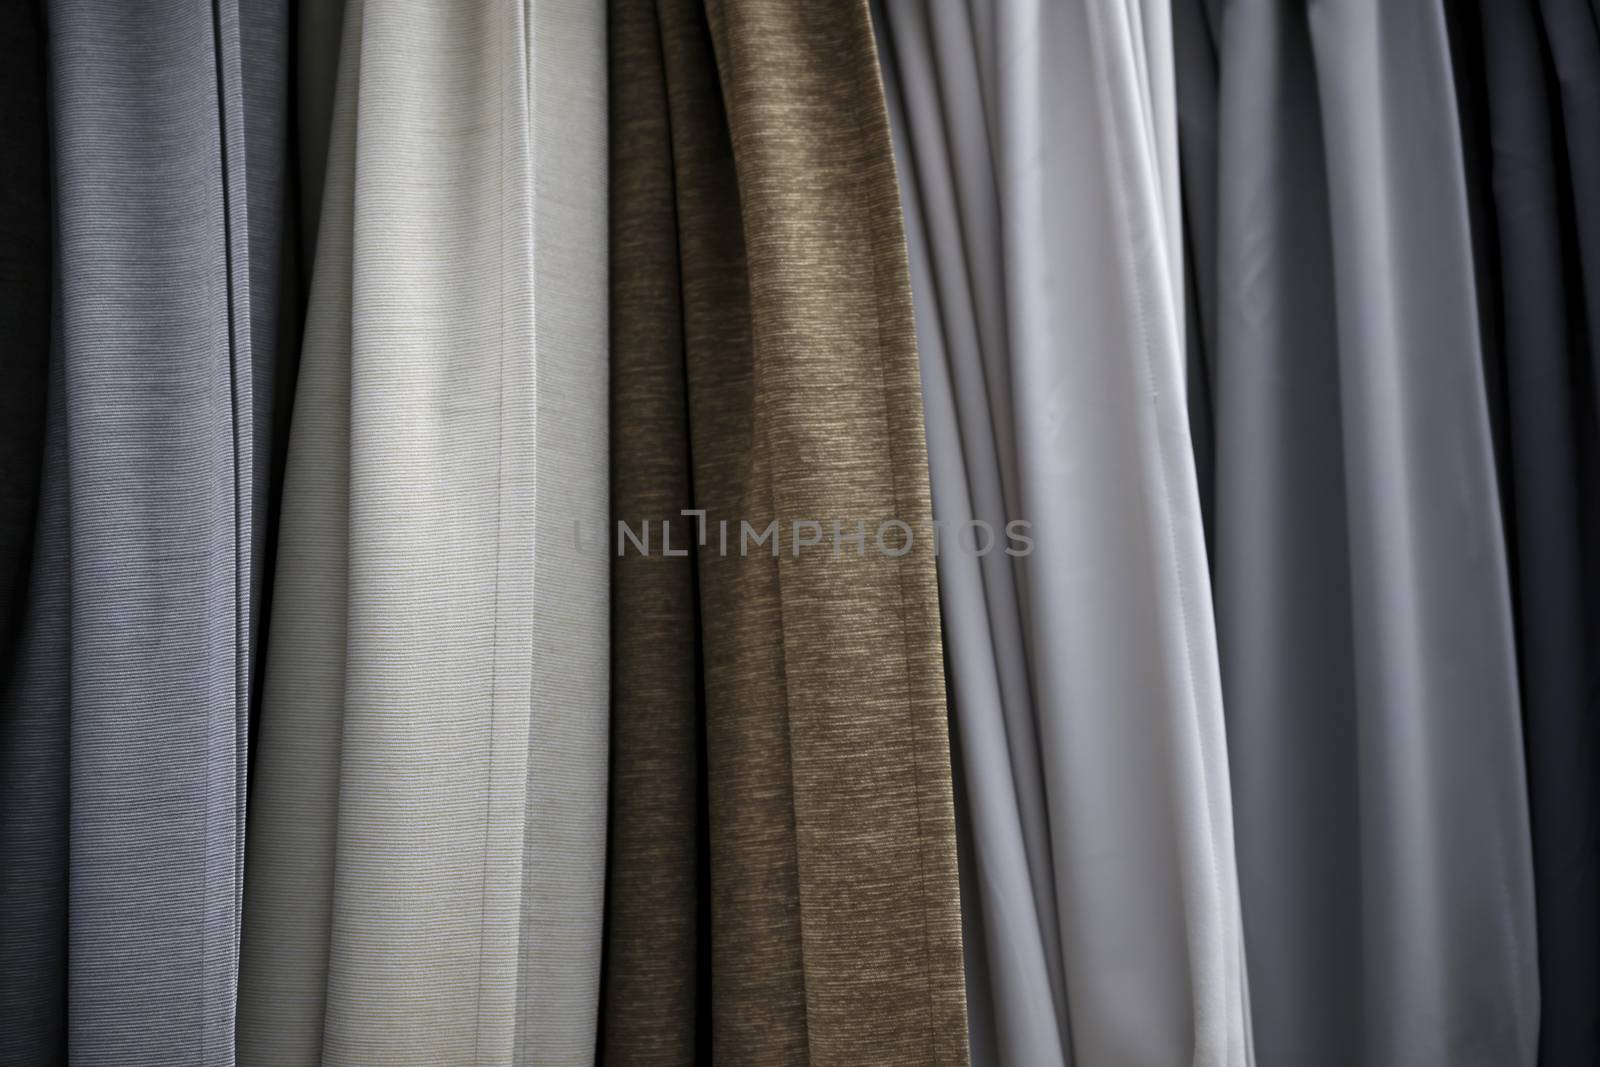 thin bedspreads on the bed of natural linen of different colors. An ecological lifestyle.